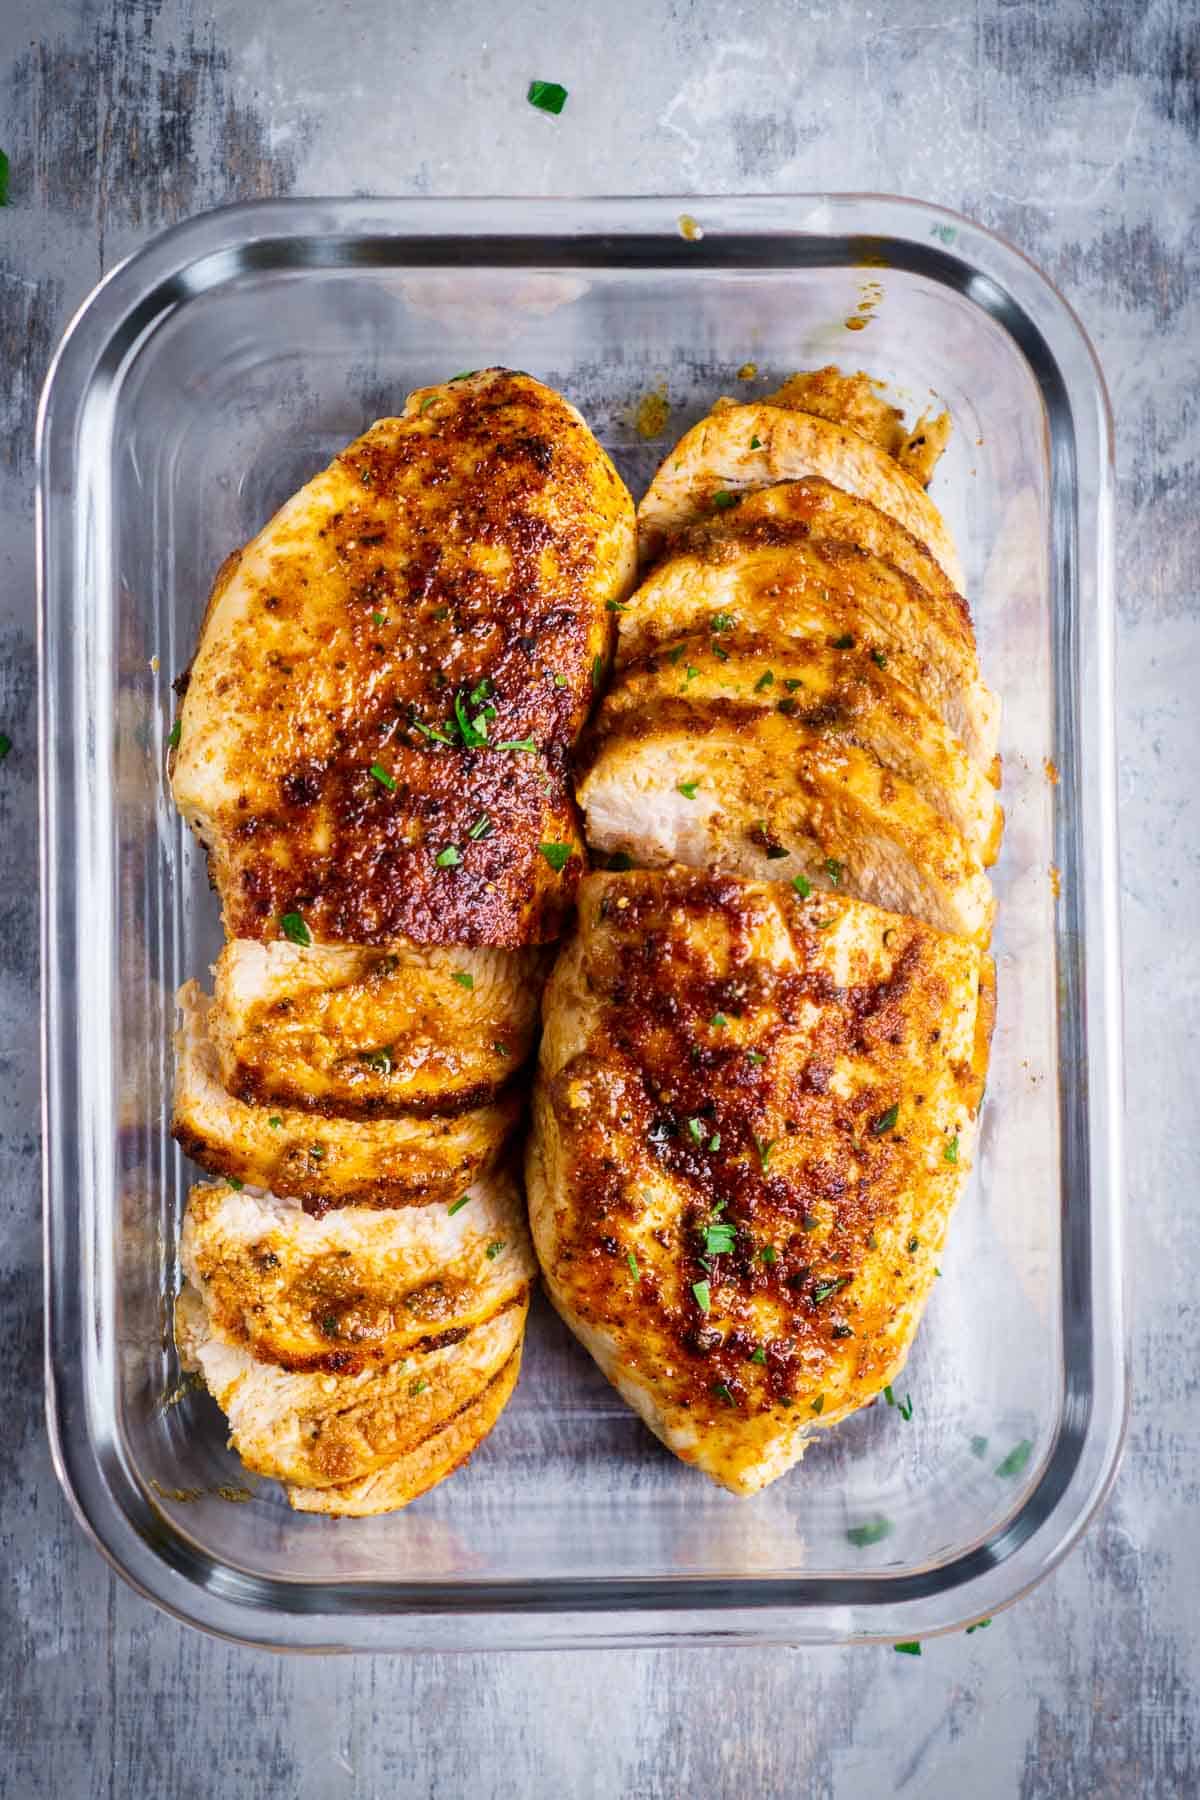 Two partially sliced chicken breasts in glass baking dish